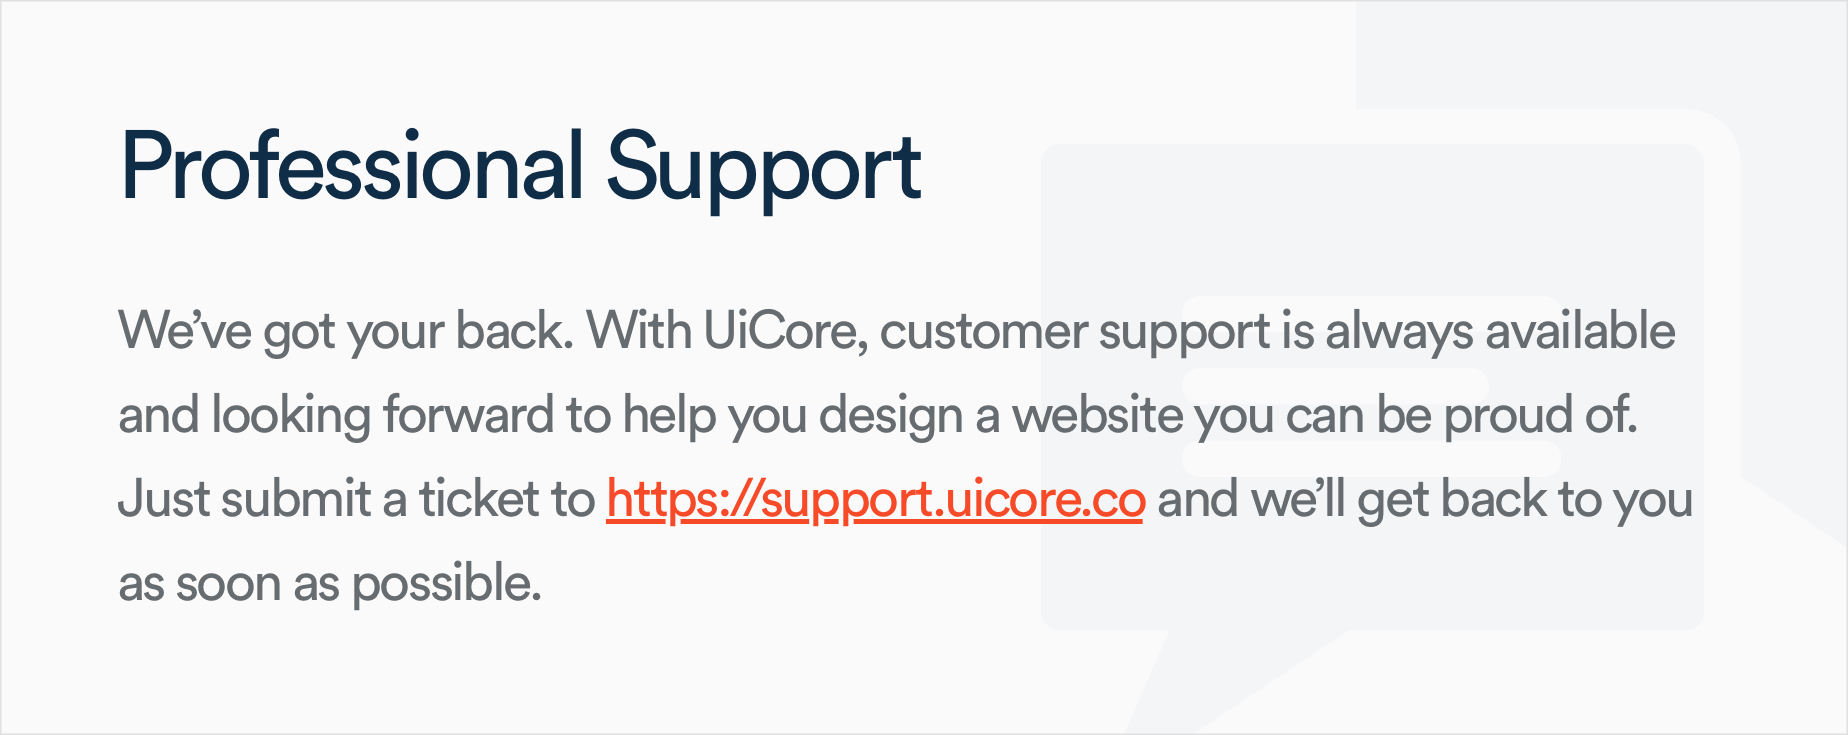 UiCore Support